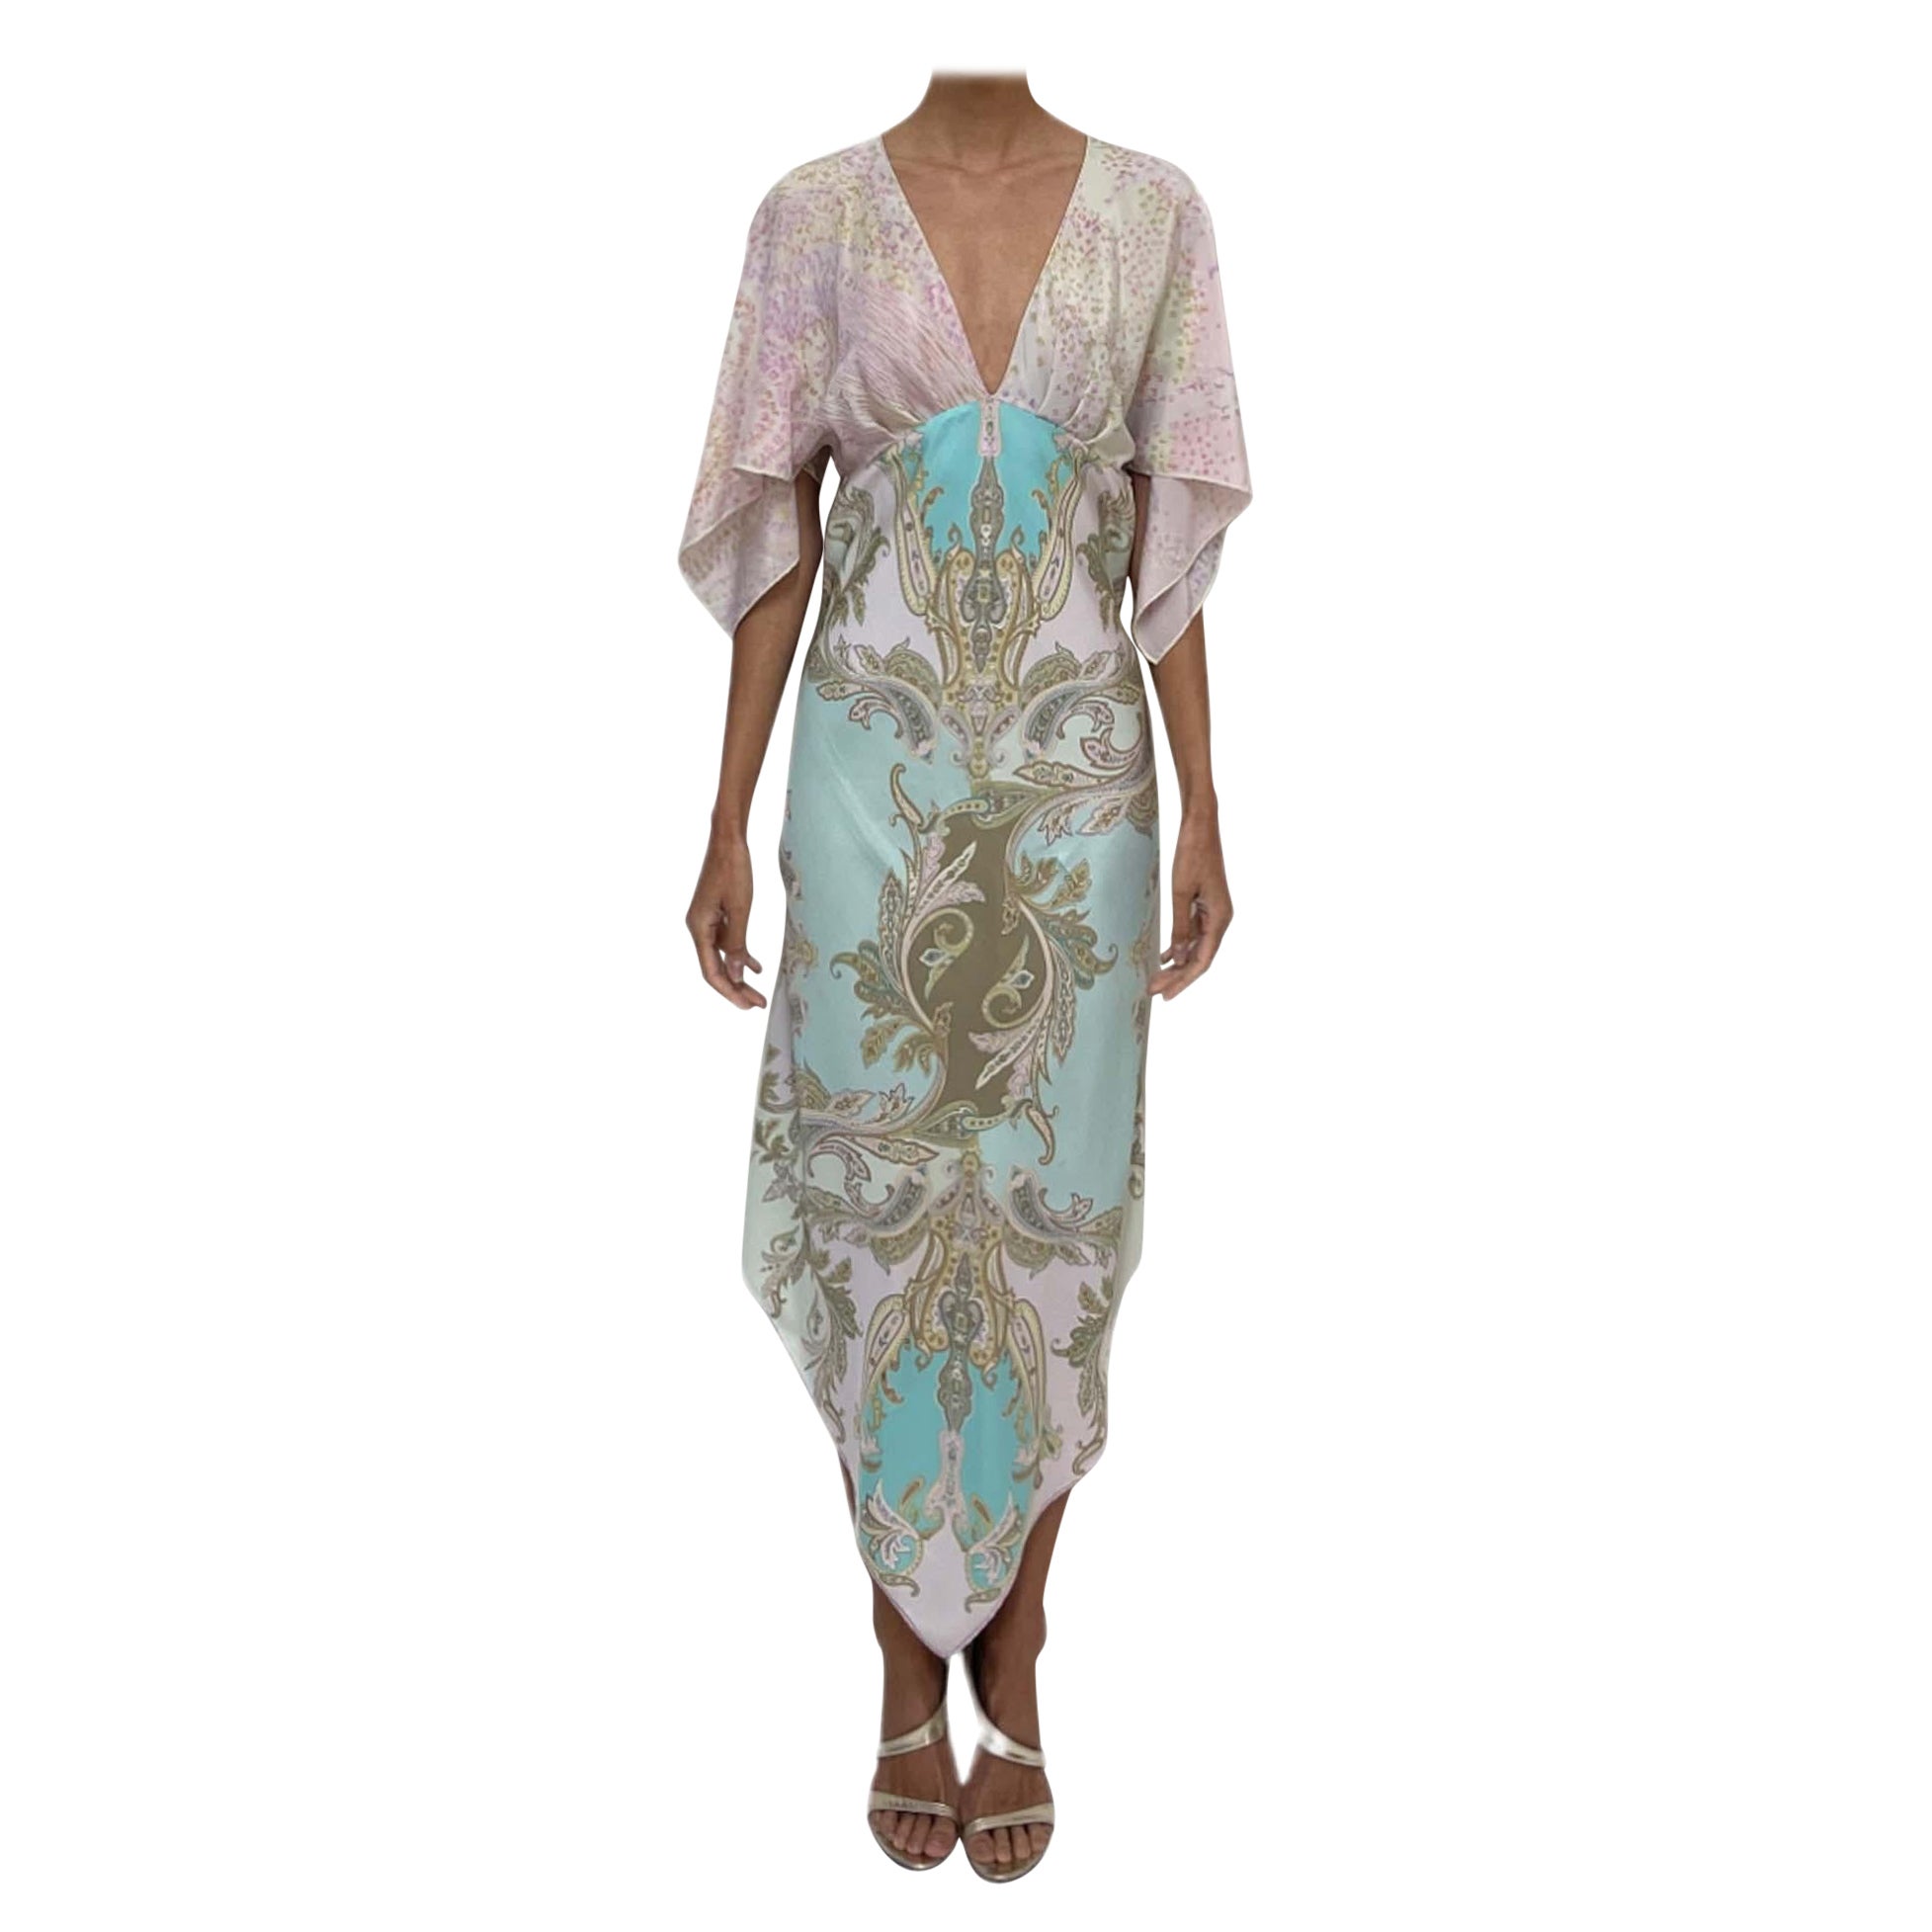 MORPHEW COLLECTION Pink, Olive Green & Sky Blue Silk Paisley 2-Scarf Dress Made For Sale